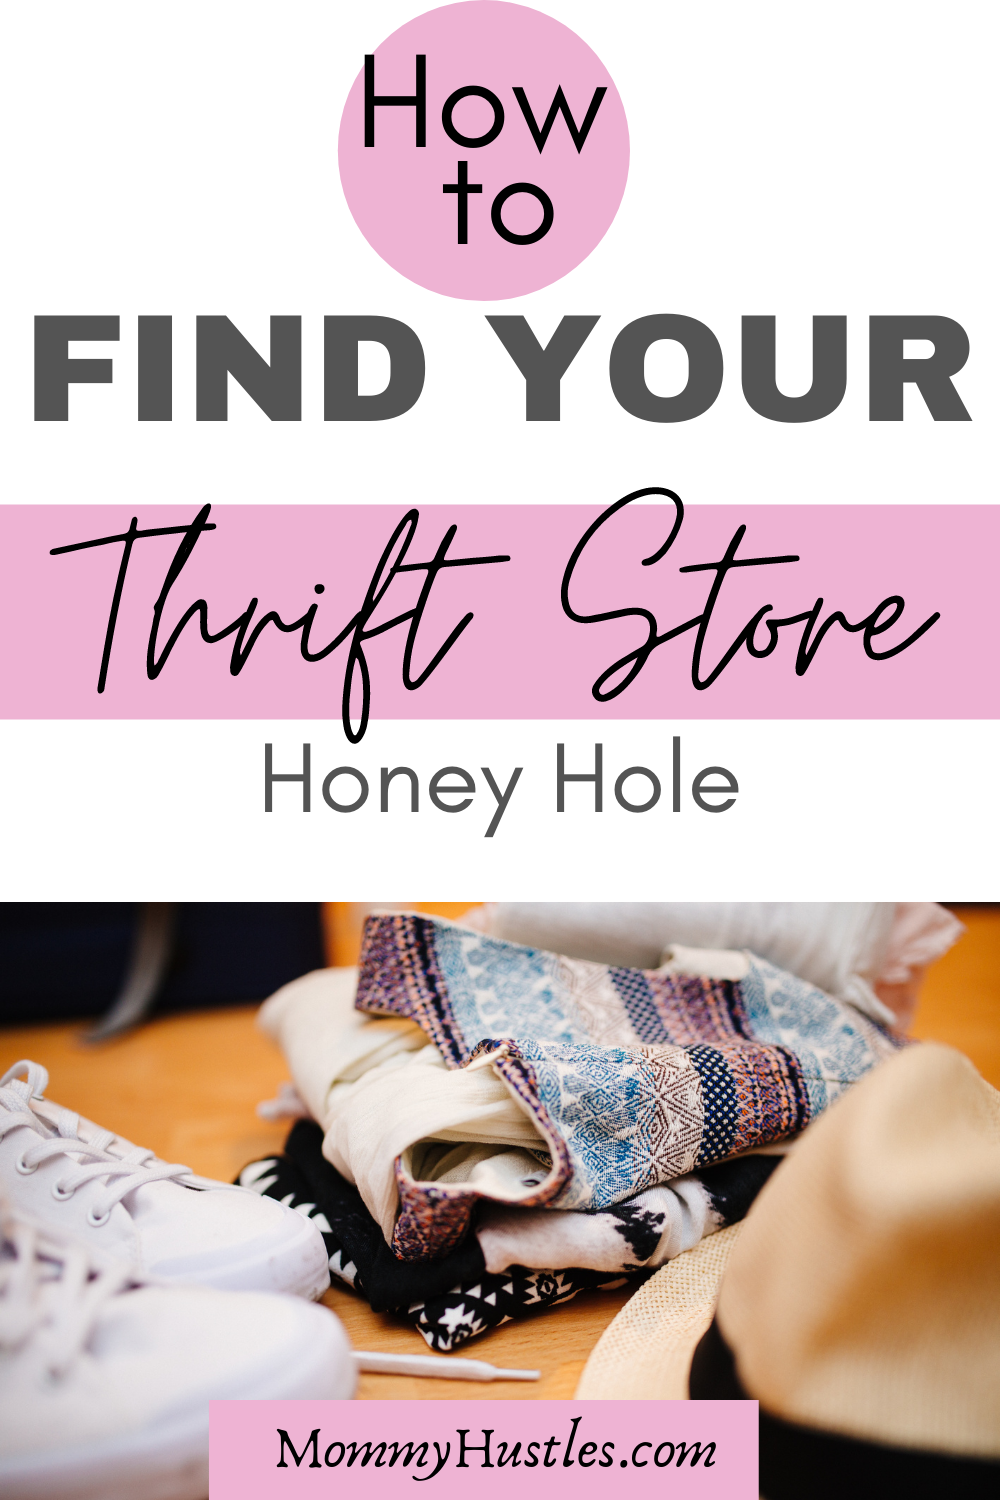 How to Find Your Thrift Store Honey Hole